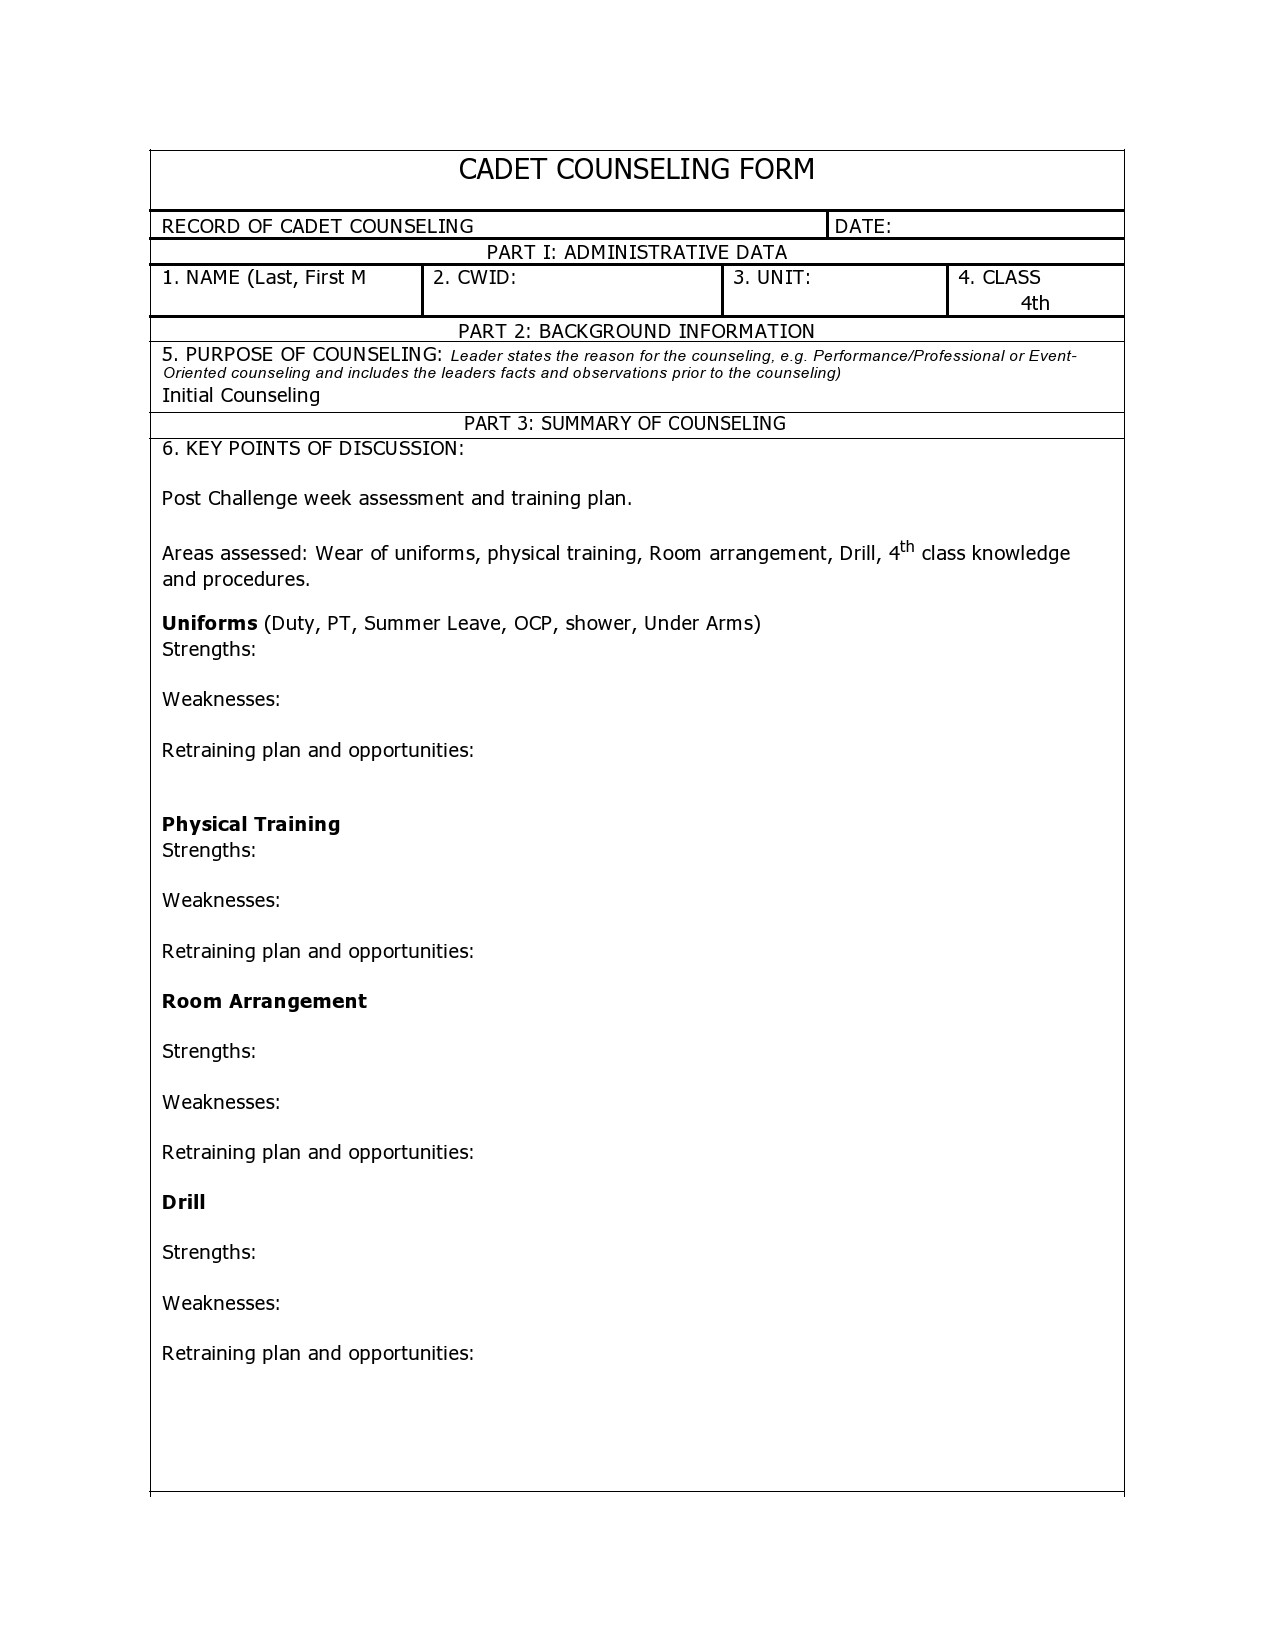 Free army counseling form 19